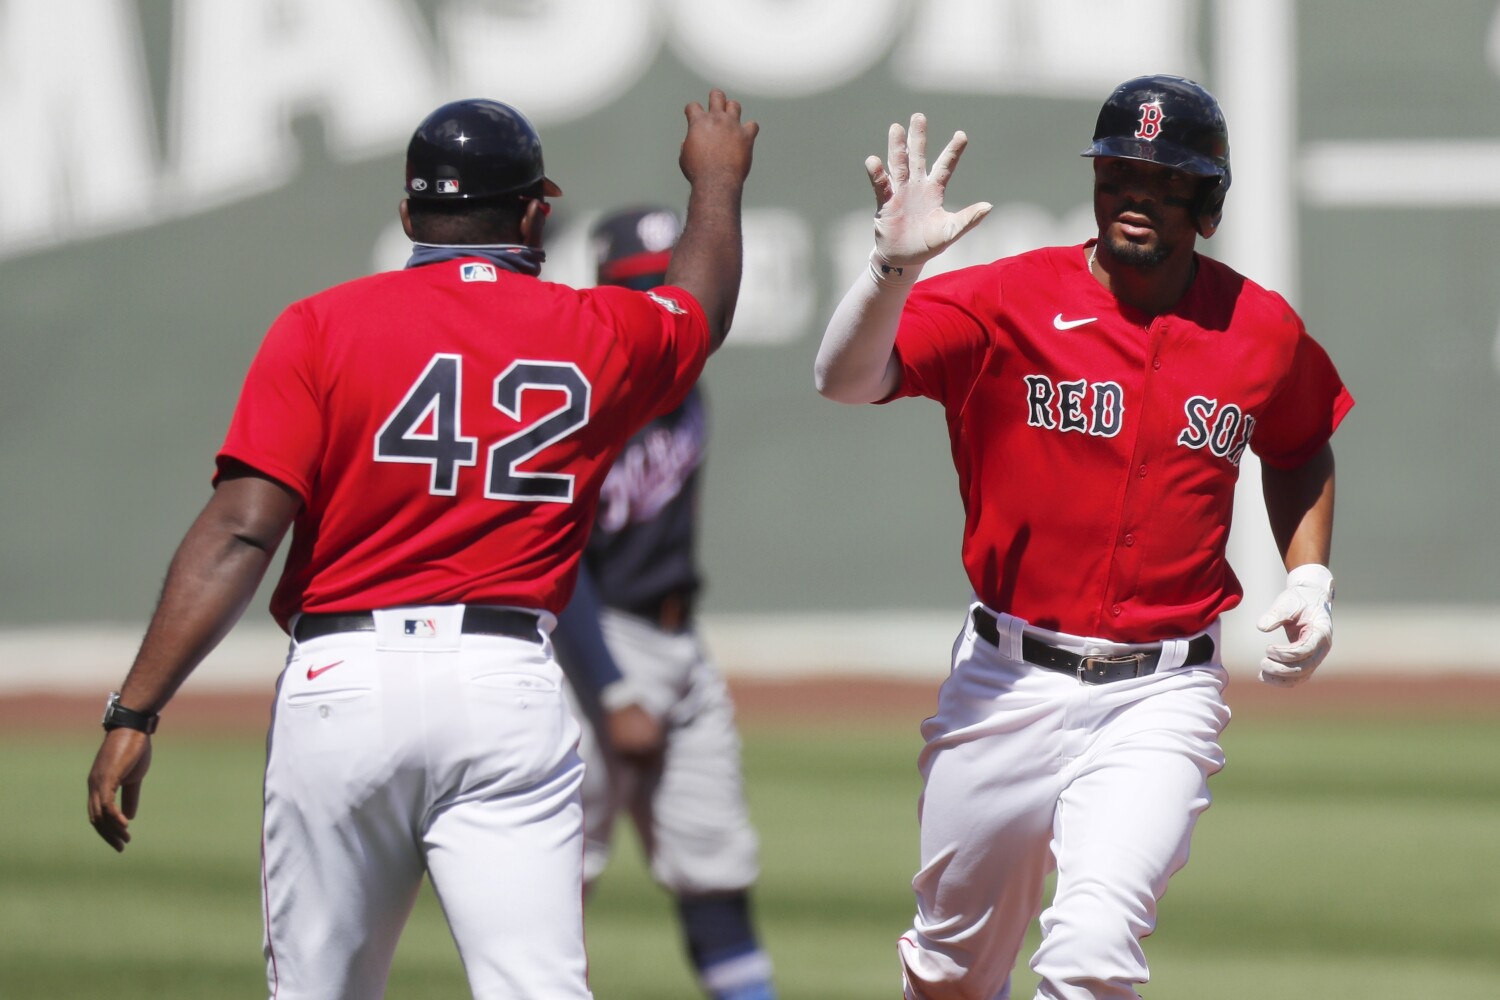 MLB roundup: Rafael Devers homers twice as Red Sox top Padres